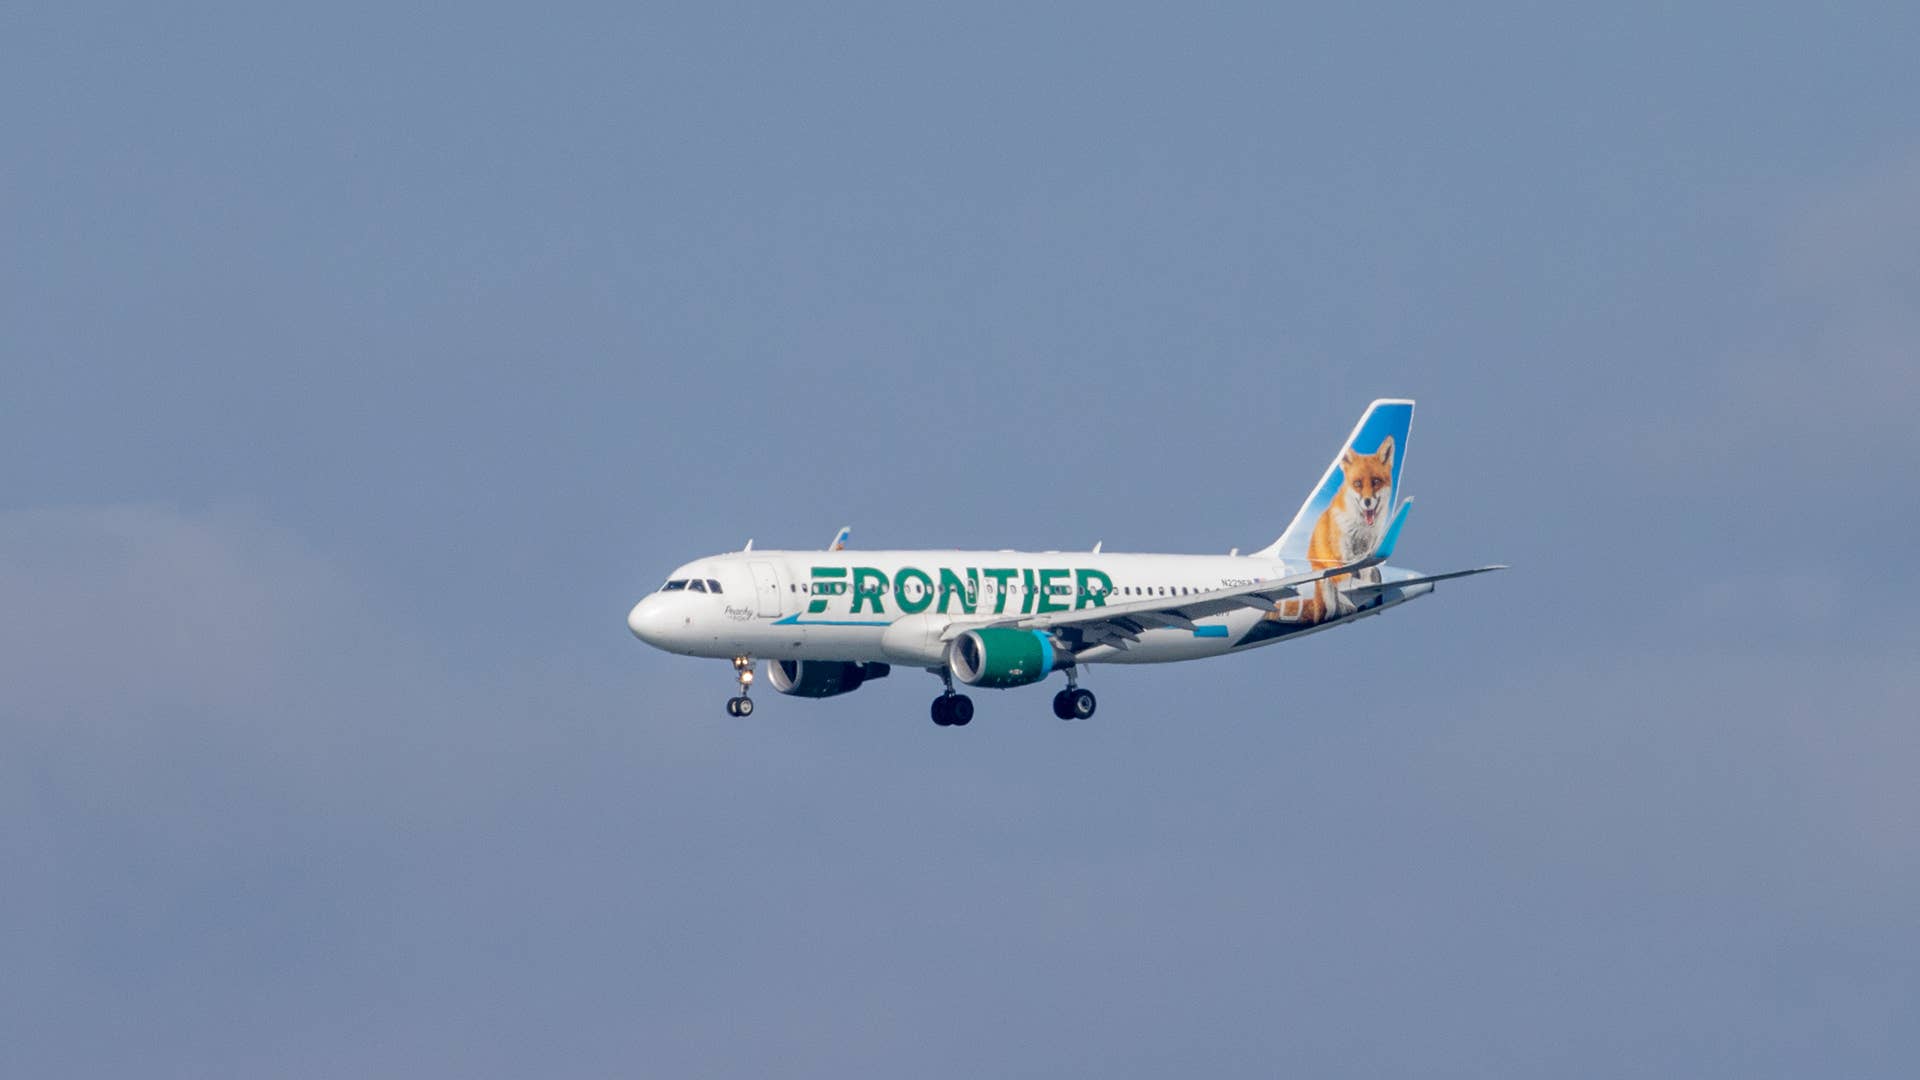 A Frontier Airlines plane lands at San Francisco International Airport